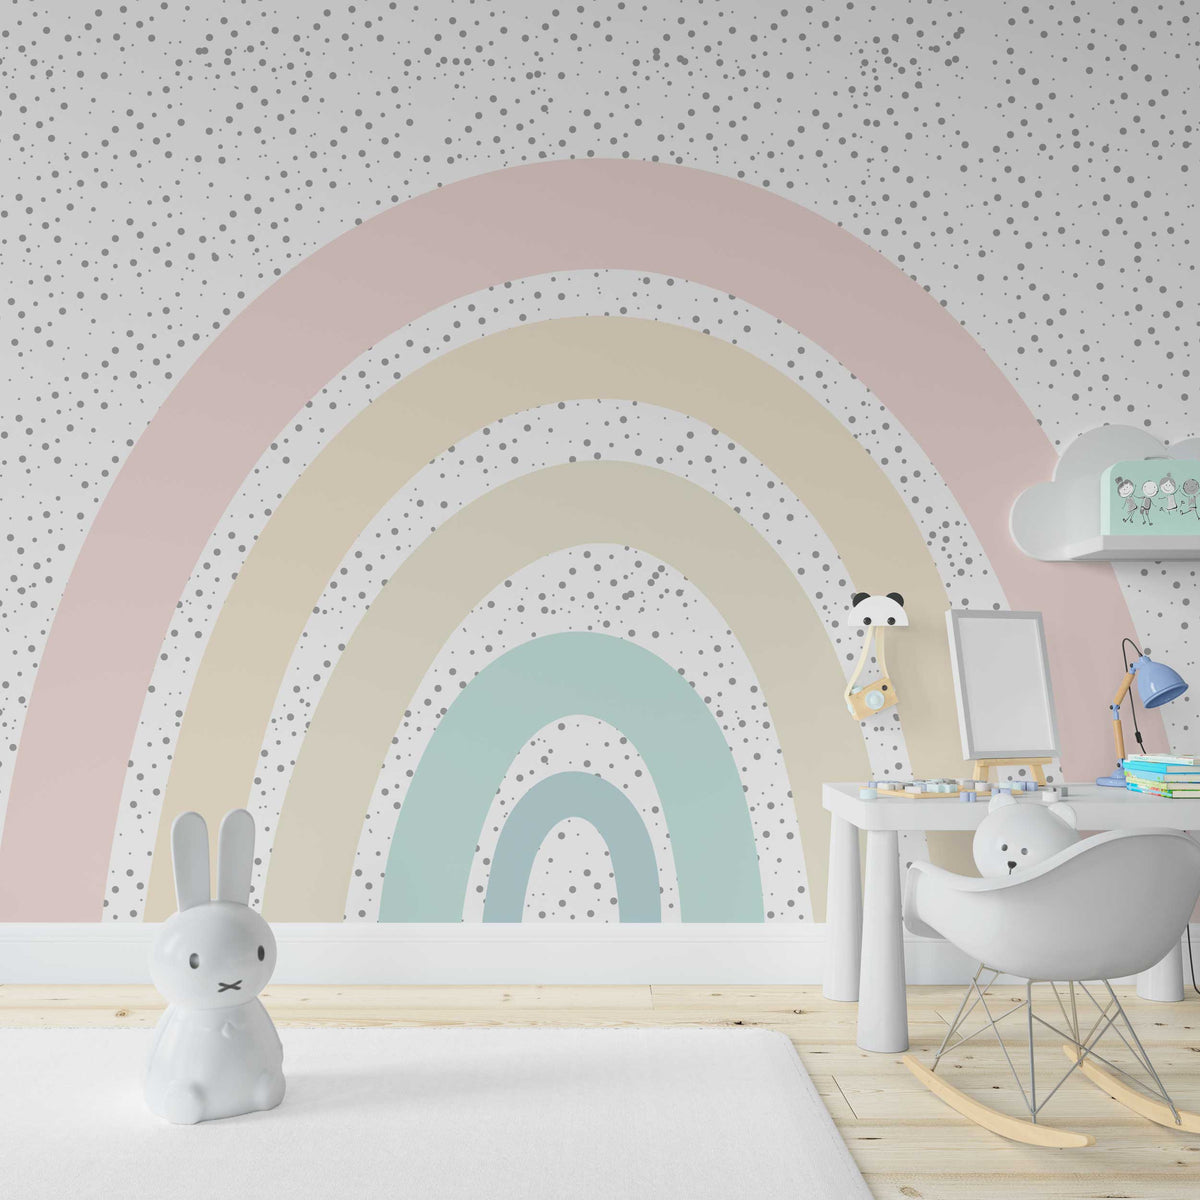 Kids Room Wallpaper Mural: Vibrant and Playful Spaces-ChandeliersDecor